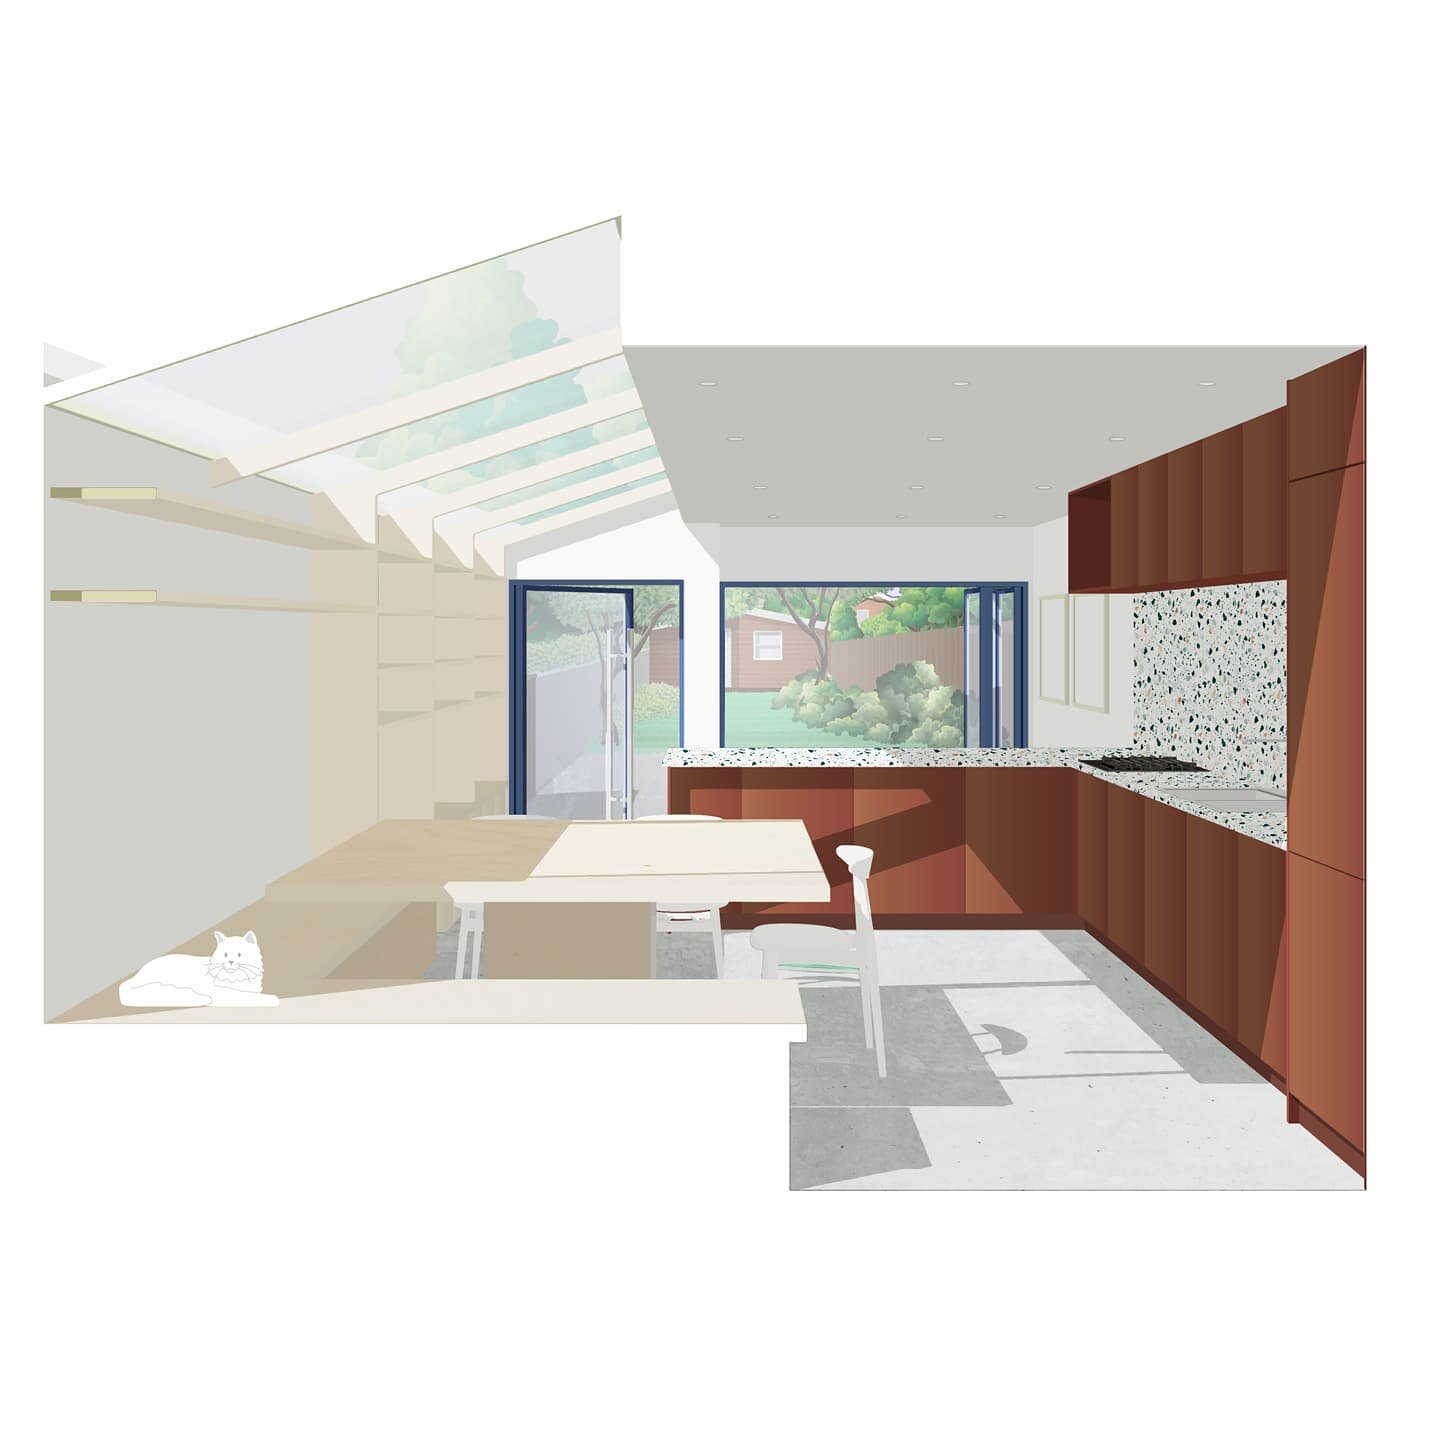 This drawing looks to illustrate the space that will be created by simply adding a side extension to this property in Teddington. The interaction between the kitchen/dining/play space has been key in arranging the space and designing the integrated f